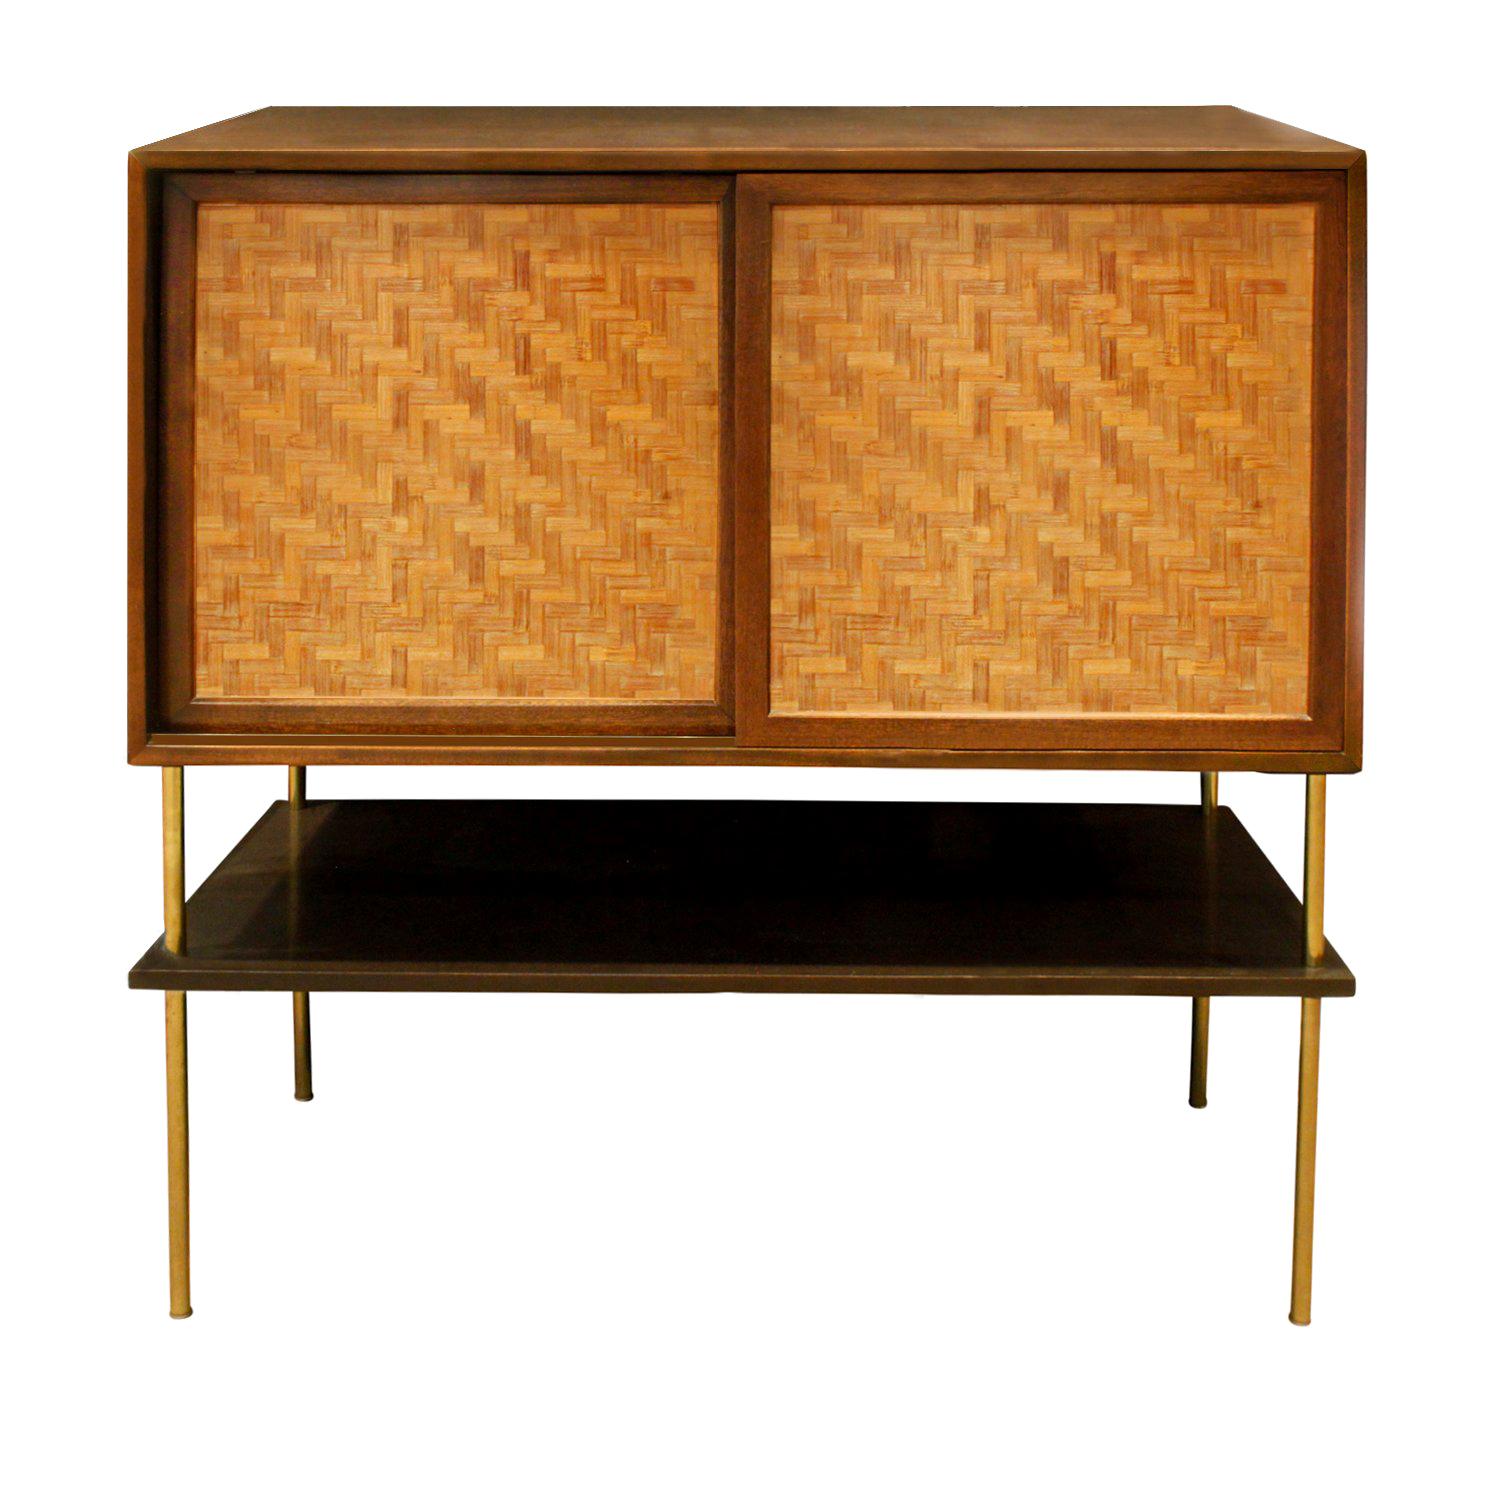 Harvey Probber Beautiful Raised Cabinet in Mahogany with Inset Caned Doors 1950s